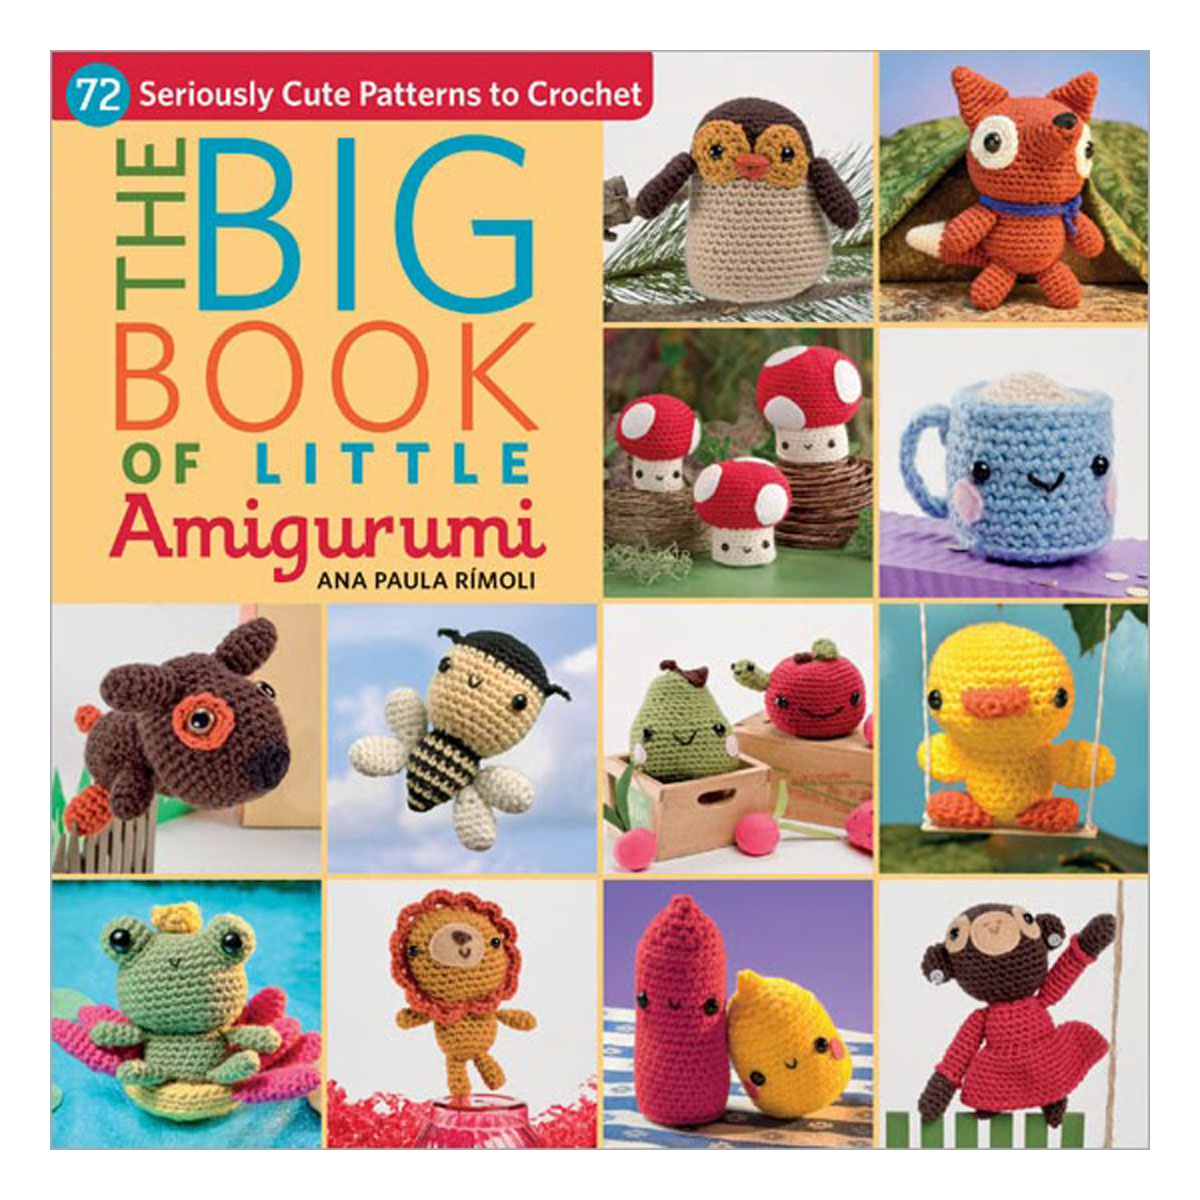 The Big Book of Little Amigurumi: 72 Seriously Cute Patterns to Crochet [Book]